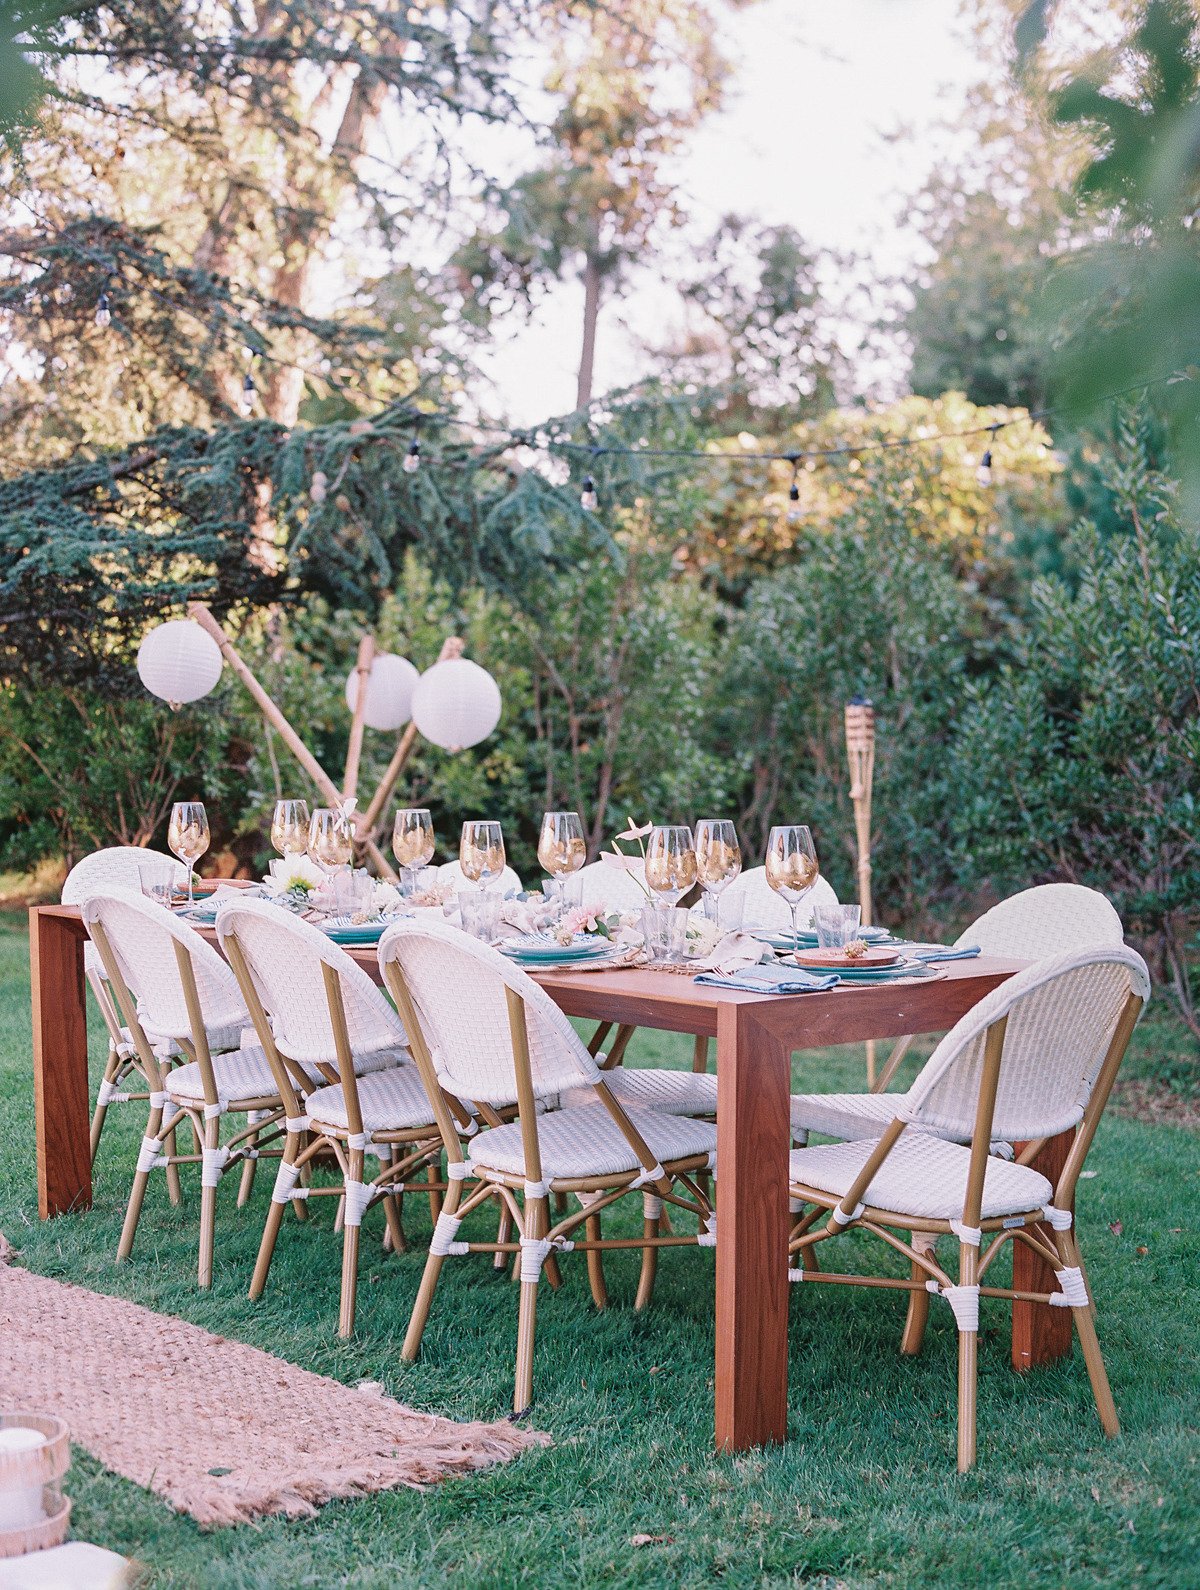 Reception table with rattan chairs, wine glasses, an hanging orbs in the background